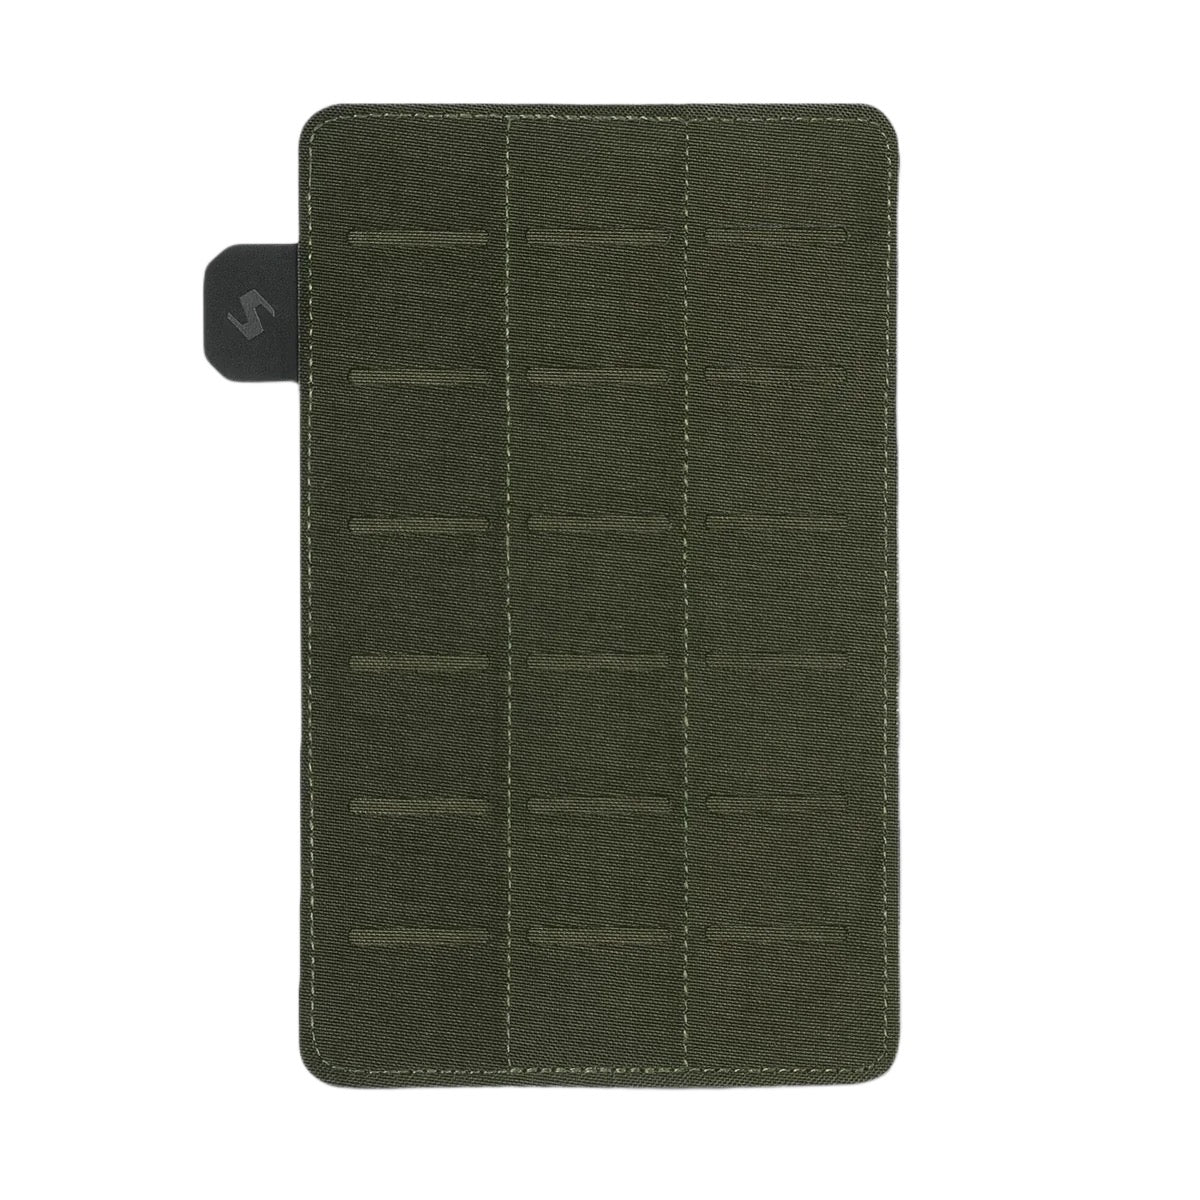 STOIRM Large Molle Panel - Olive Green